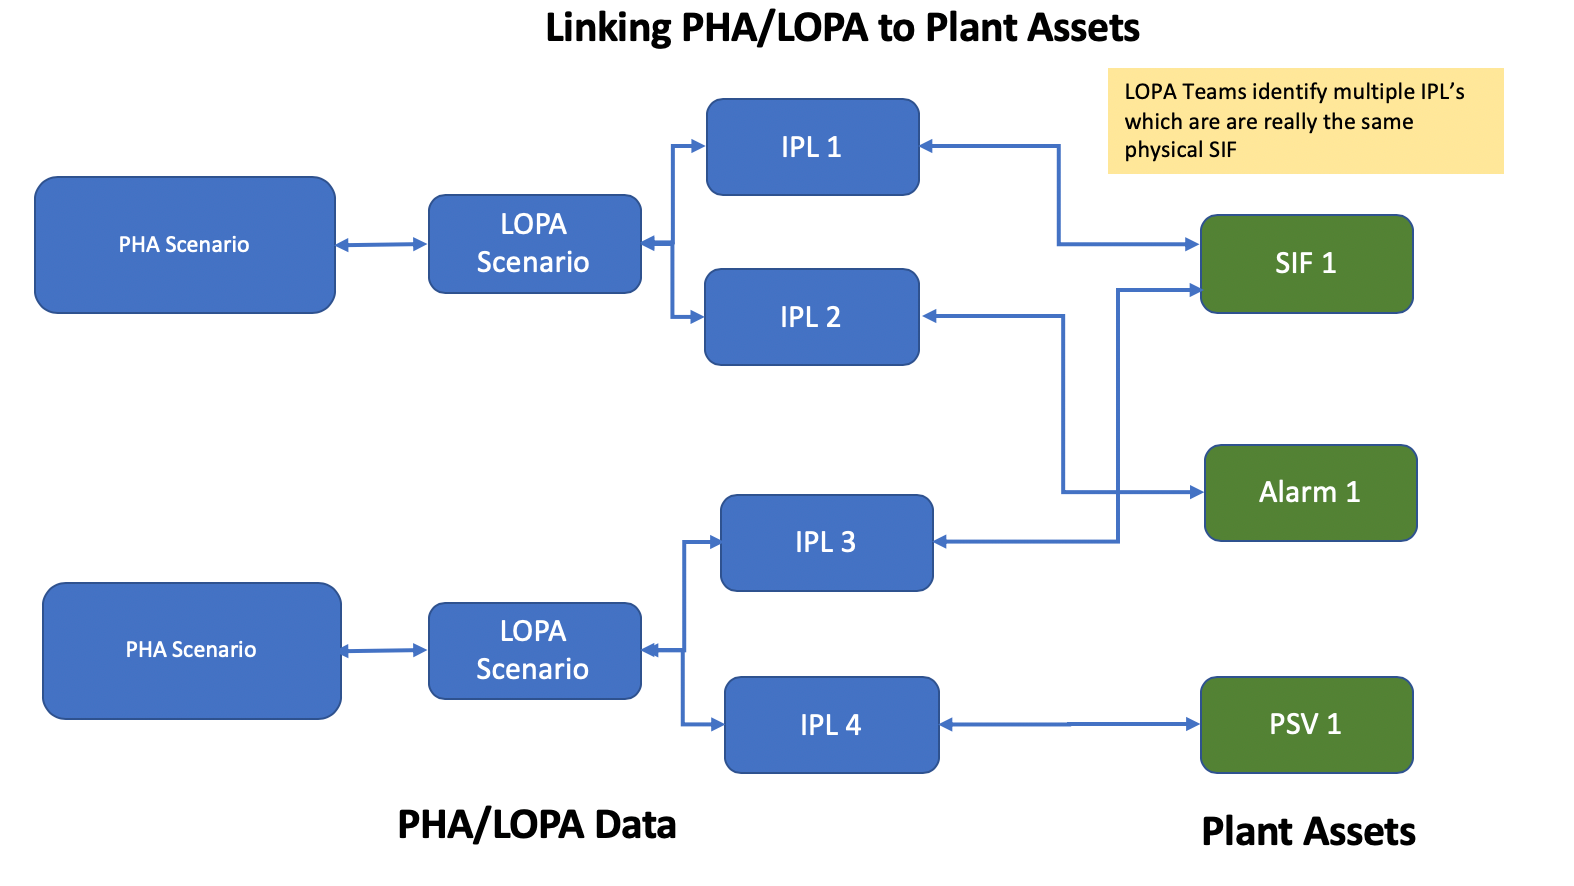 promoting a sustainable process safety culture flow chart linking PHA and LOPA plant assests